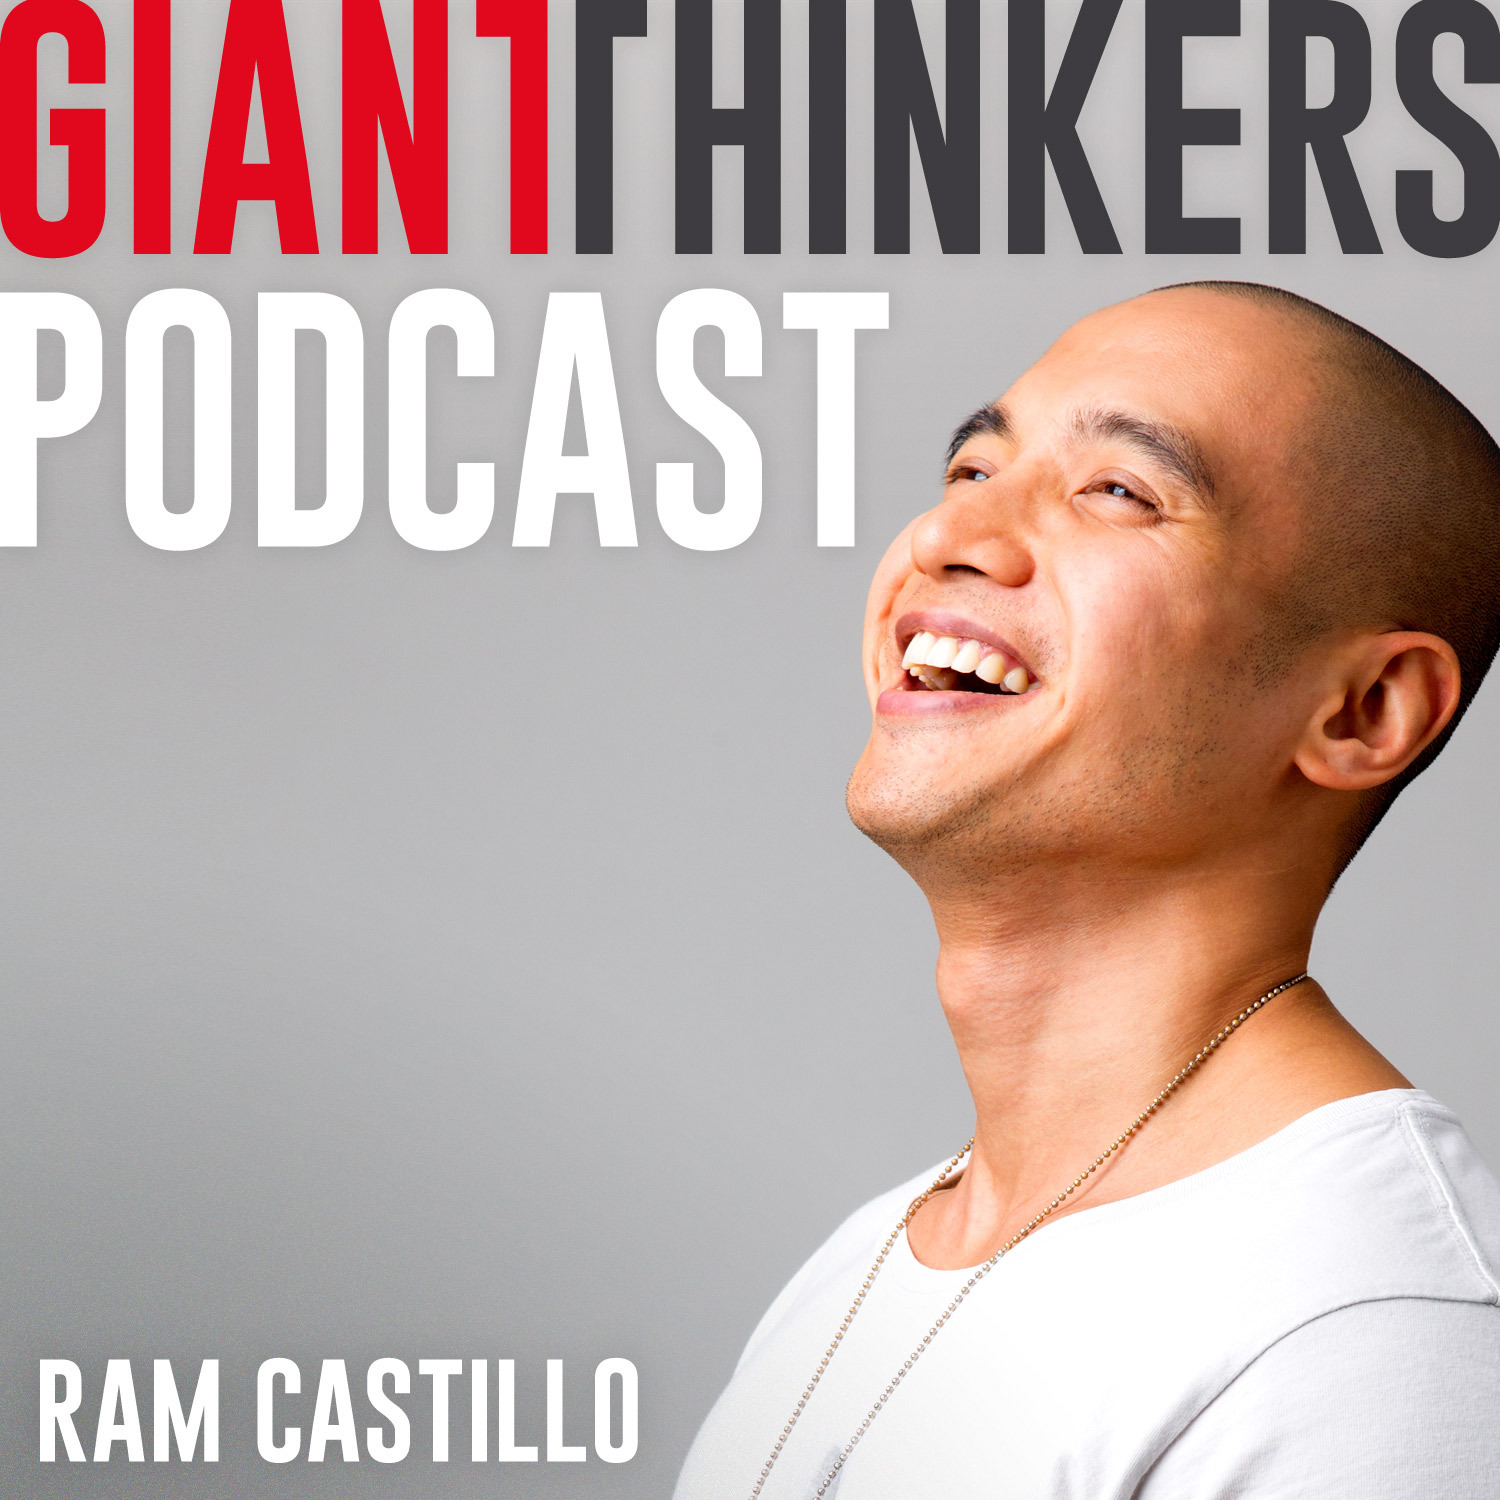 The first 50 pages of ‘How to get a mentor as a designer, guaranteed’ by Ram Castillo for free [AUDIO BOOK VERSION]